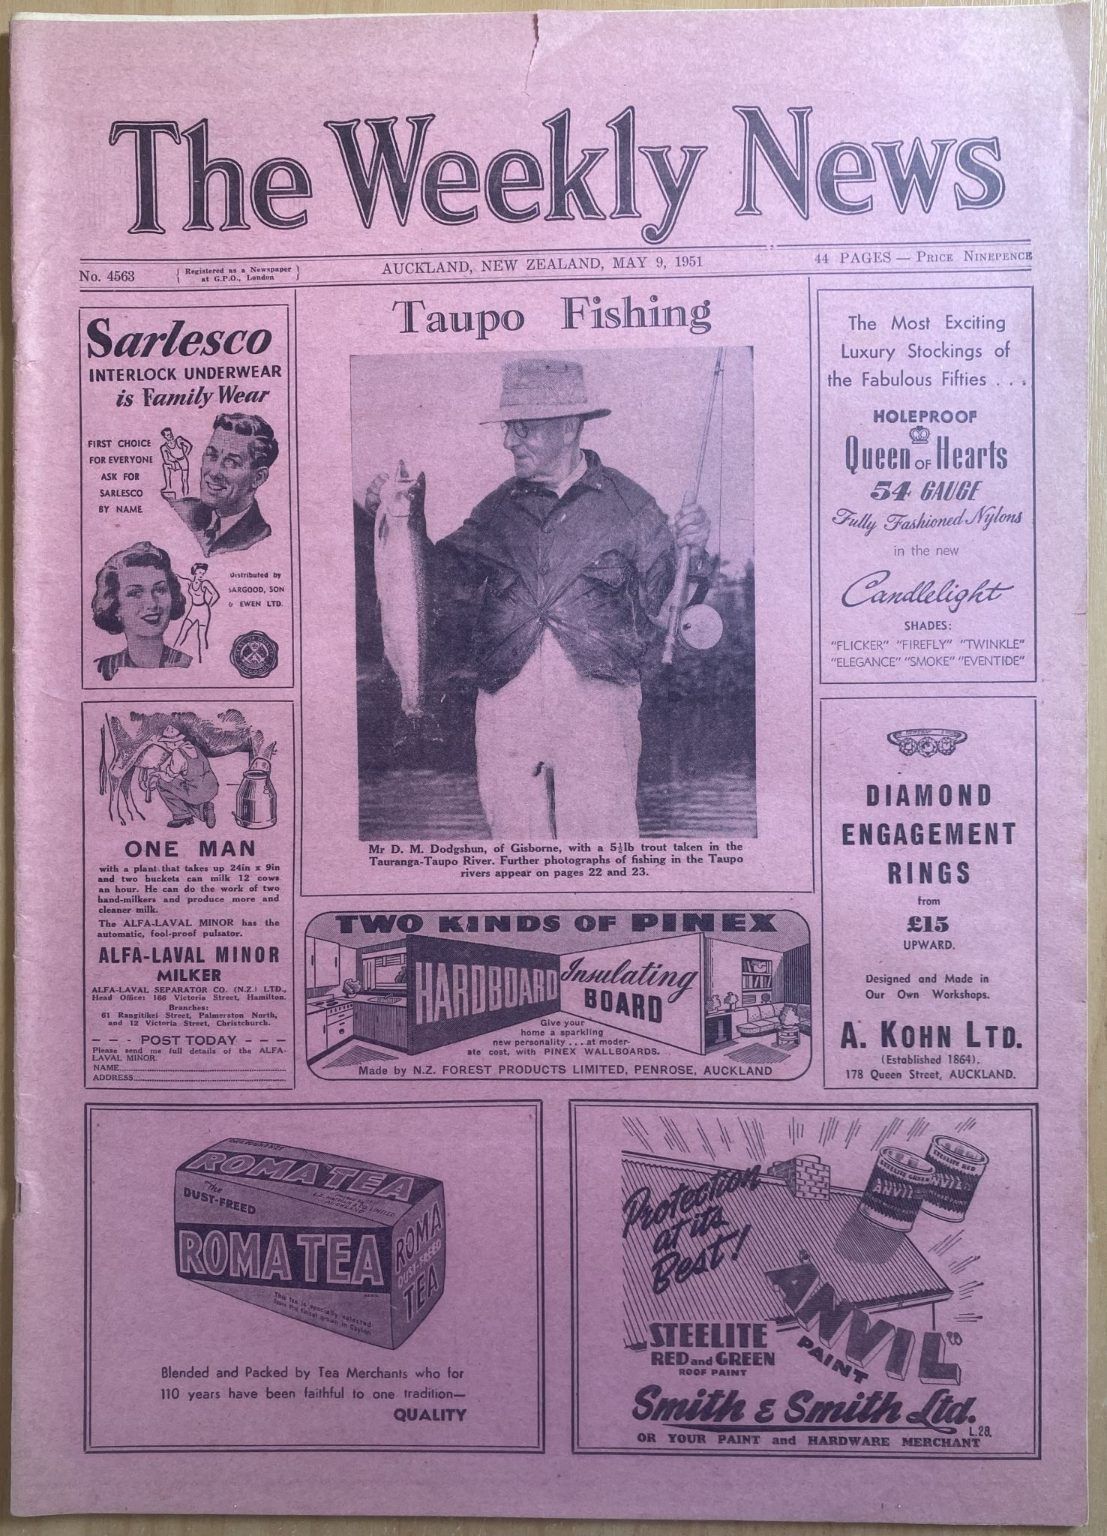 OLD NEWSPAPER: The Weekly News, No. 4563, 9 May 1951